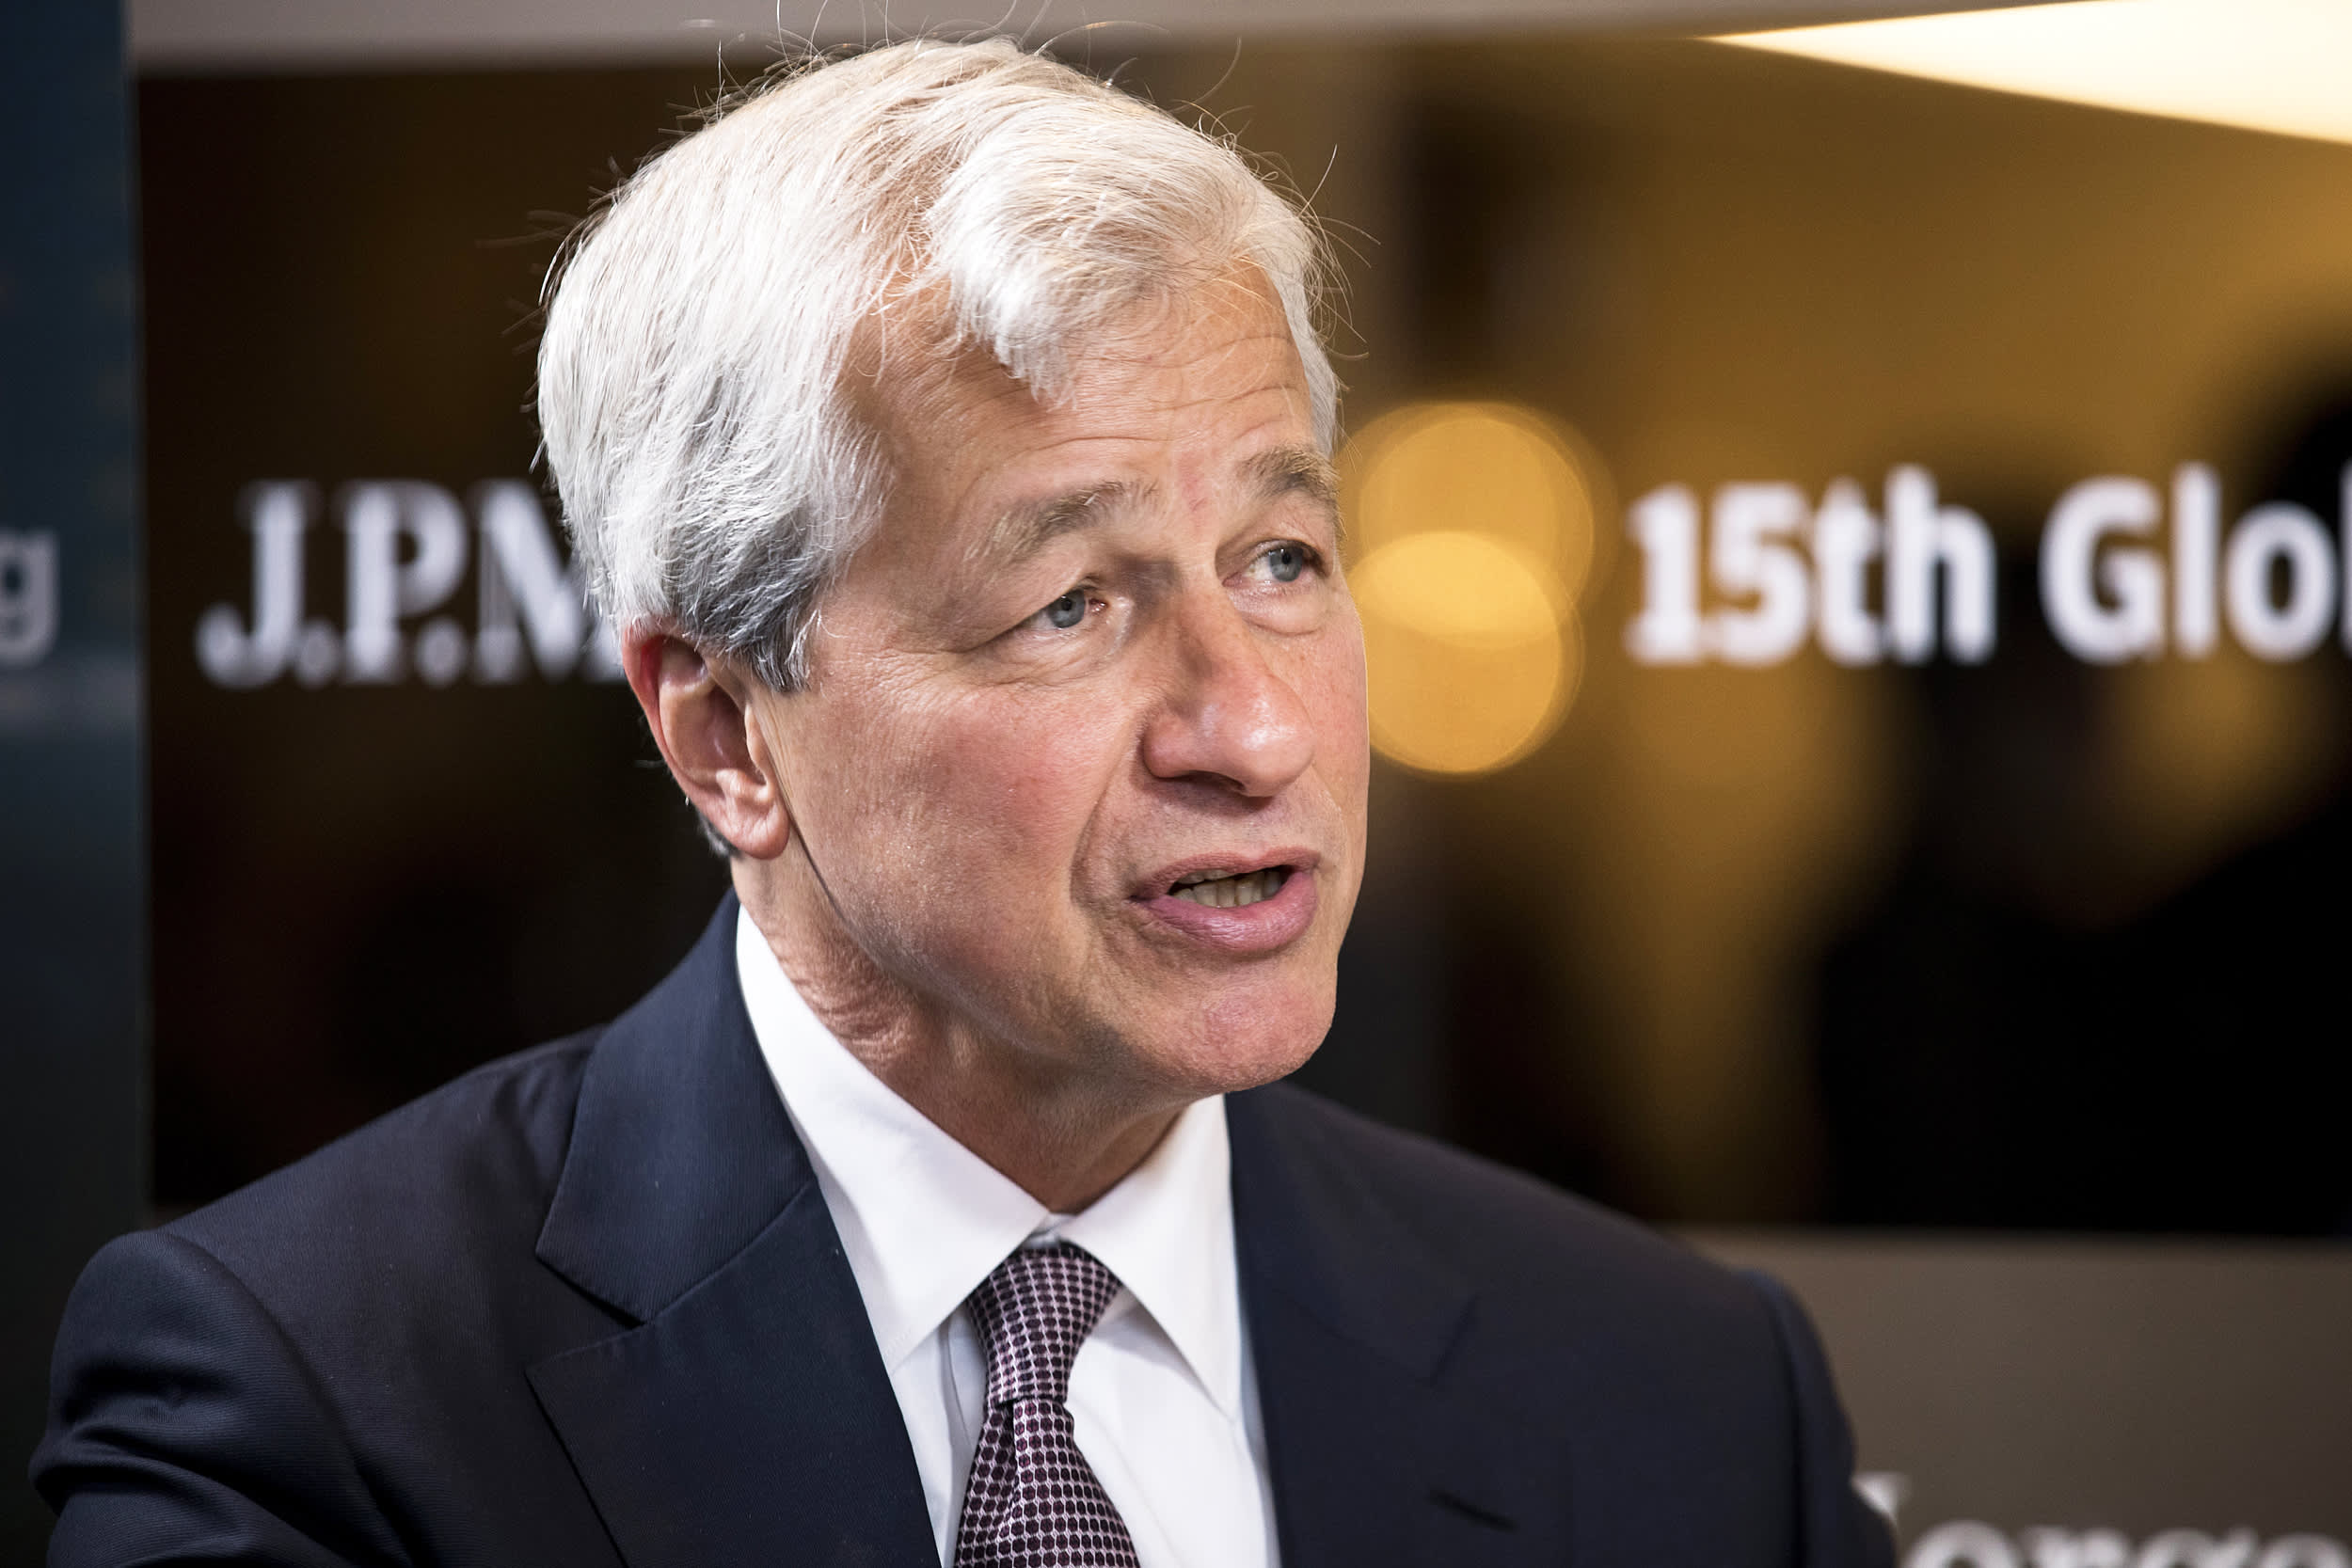 Jamie Dimon says CEOs `shouldn't be crybabies about it'